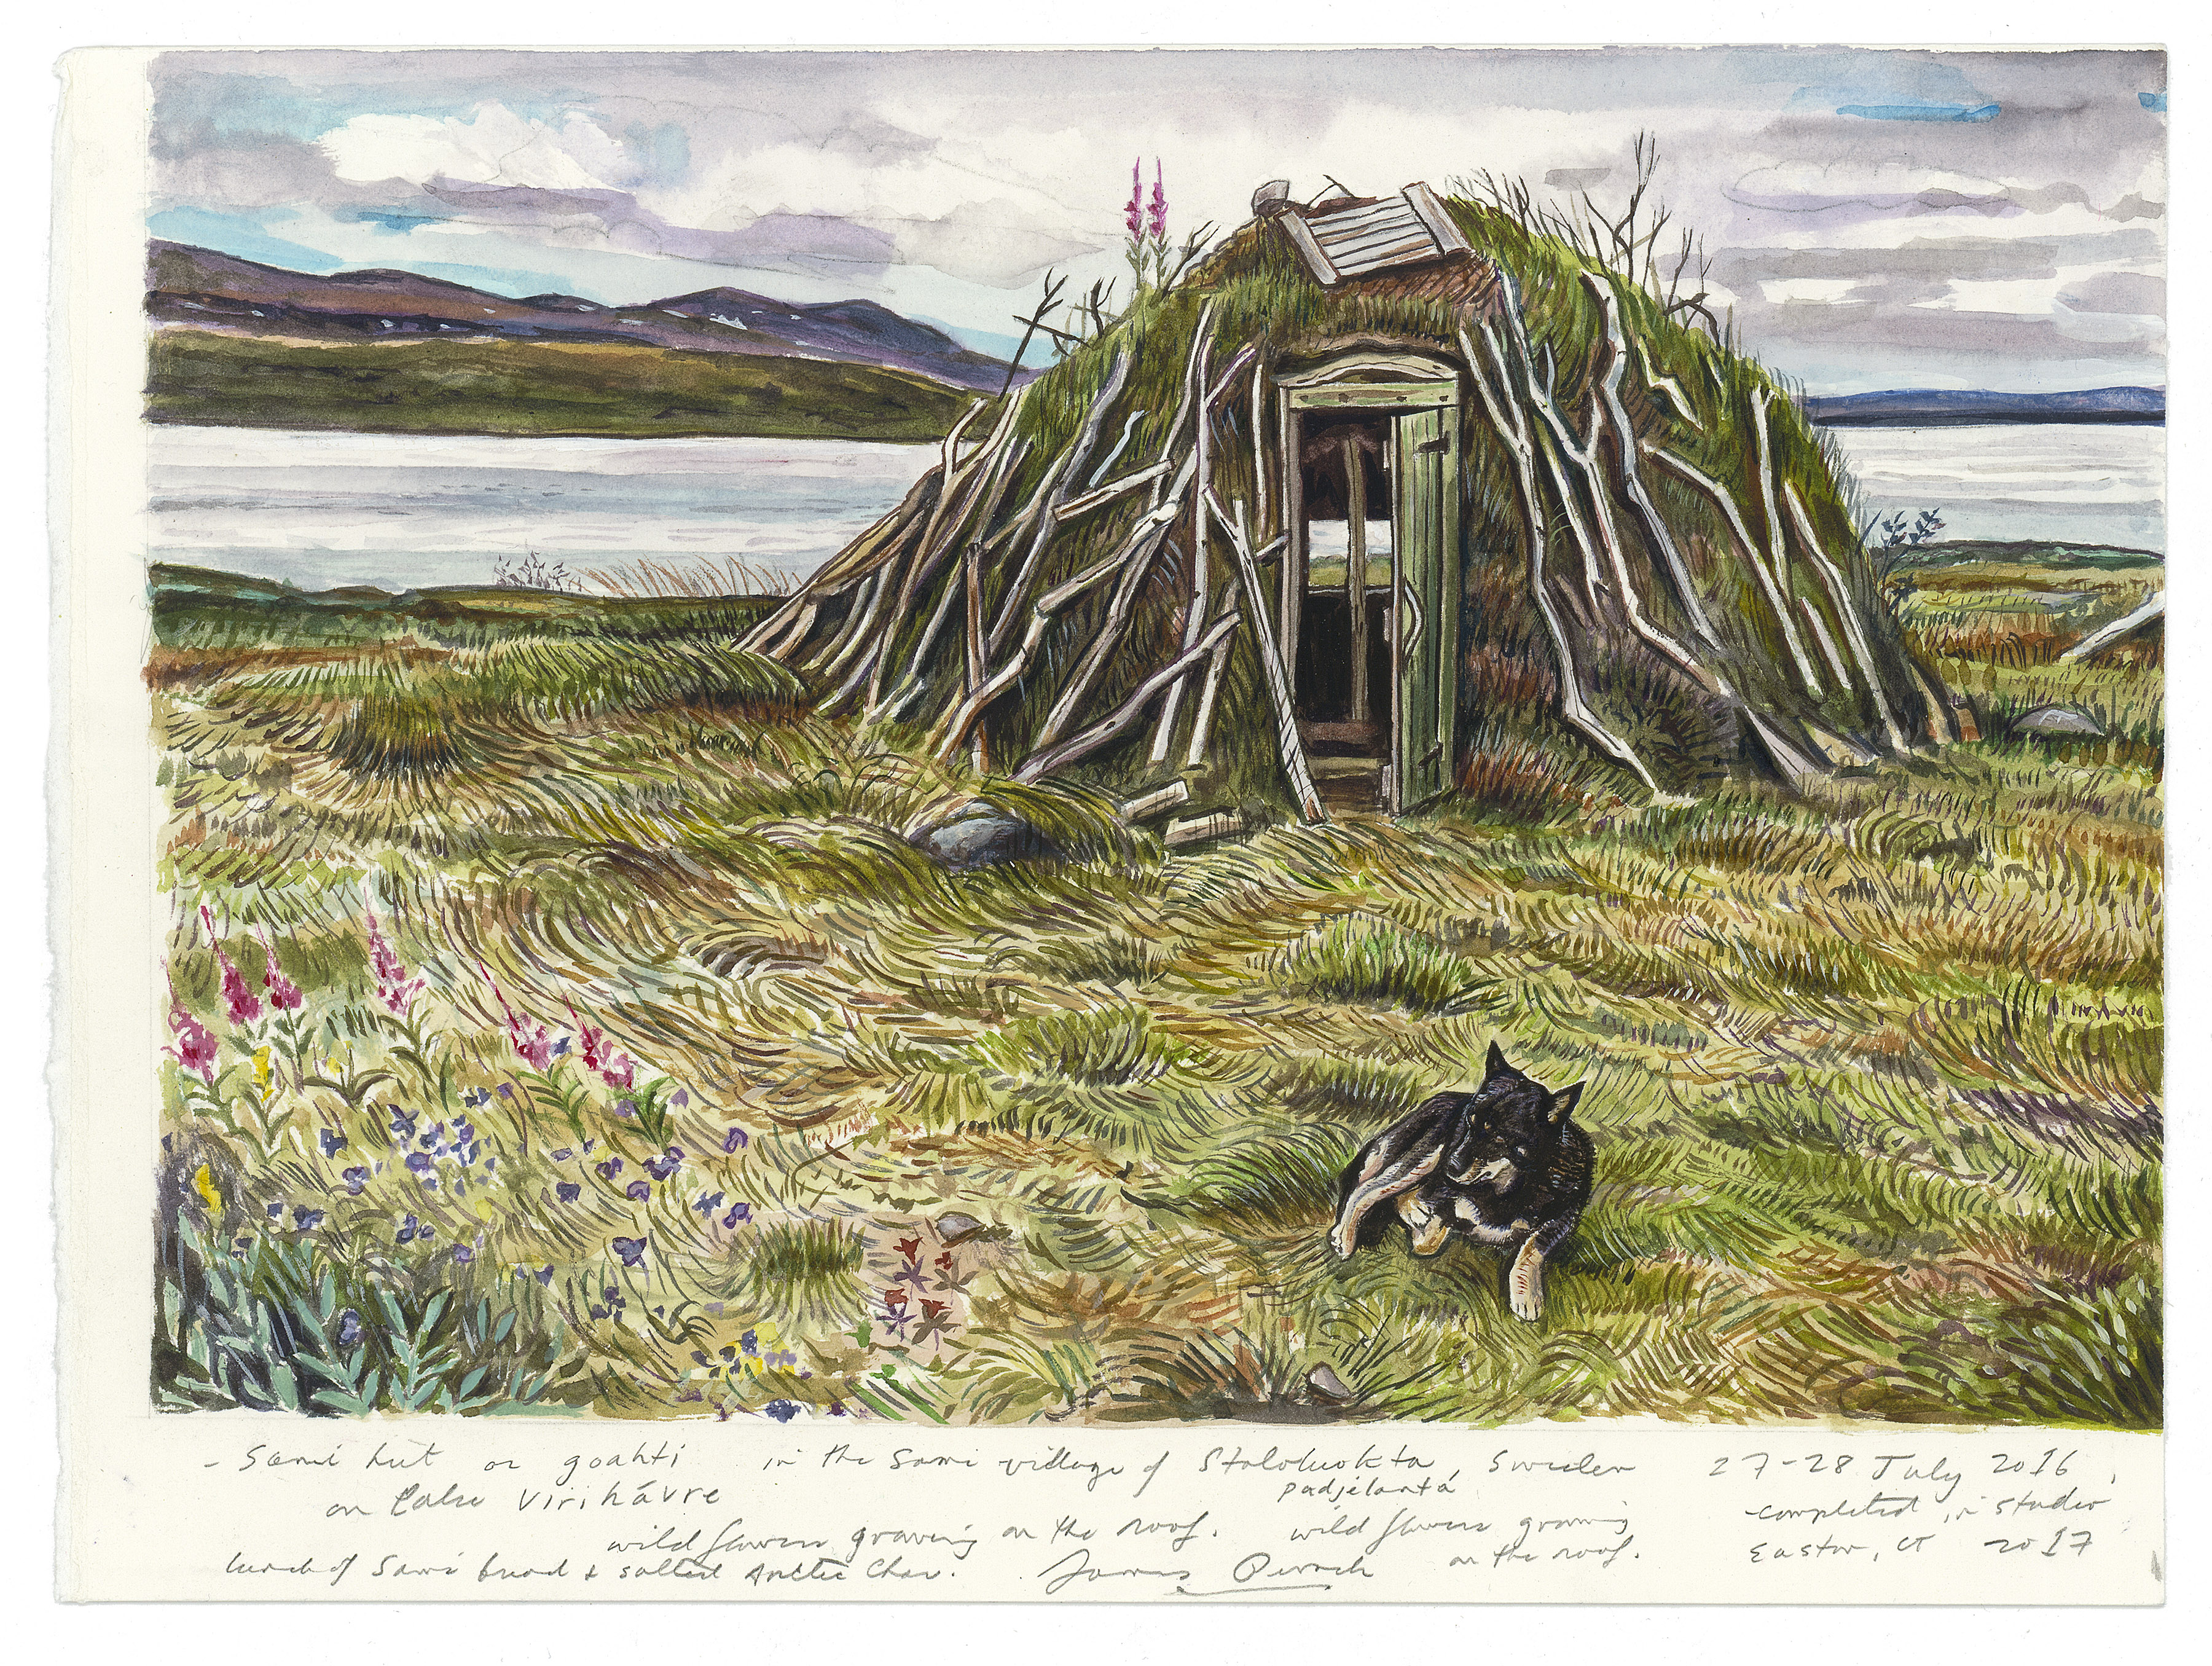 Sami reindeer herdersÕ hut on Lake Virihaure in Padjelanta National Park. Artist and writer James Prosek retraced the journey through Swedish Lapland made in 1732 by Carl Linnaeus, the man who invented the two-name system (genus and species) for identifying organisms. (Painting by James Prosek, courtesy of the artist and Schwartz-Wajahat, New York via The New York Times) -- NO SALES; FOR EDITORIAL USE ONLY WITH STORY SLUGGED LINNAEUS FOOTSTEPS ADV21 BY PROSEK FOR MAY 16, 2017. ALL OTHER USE PROHIBITED.